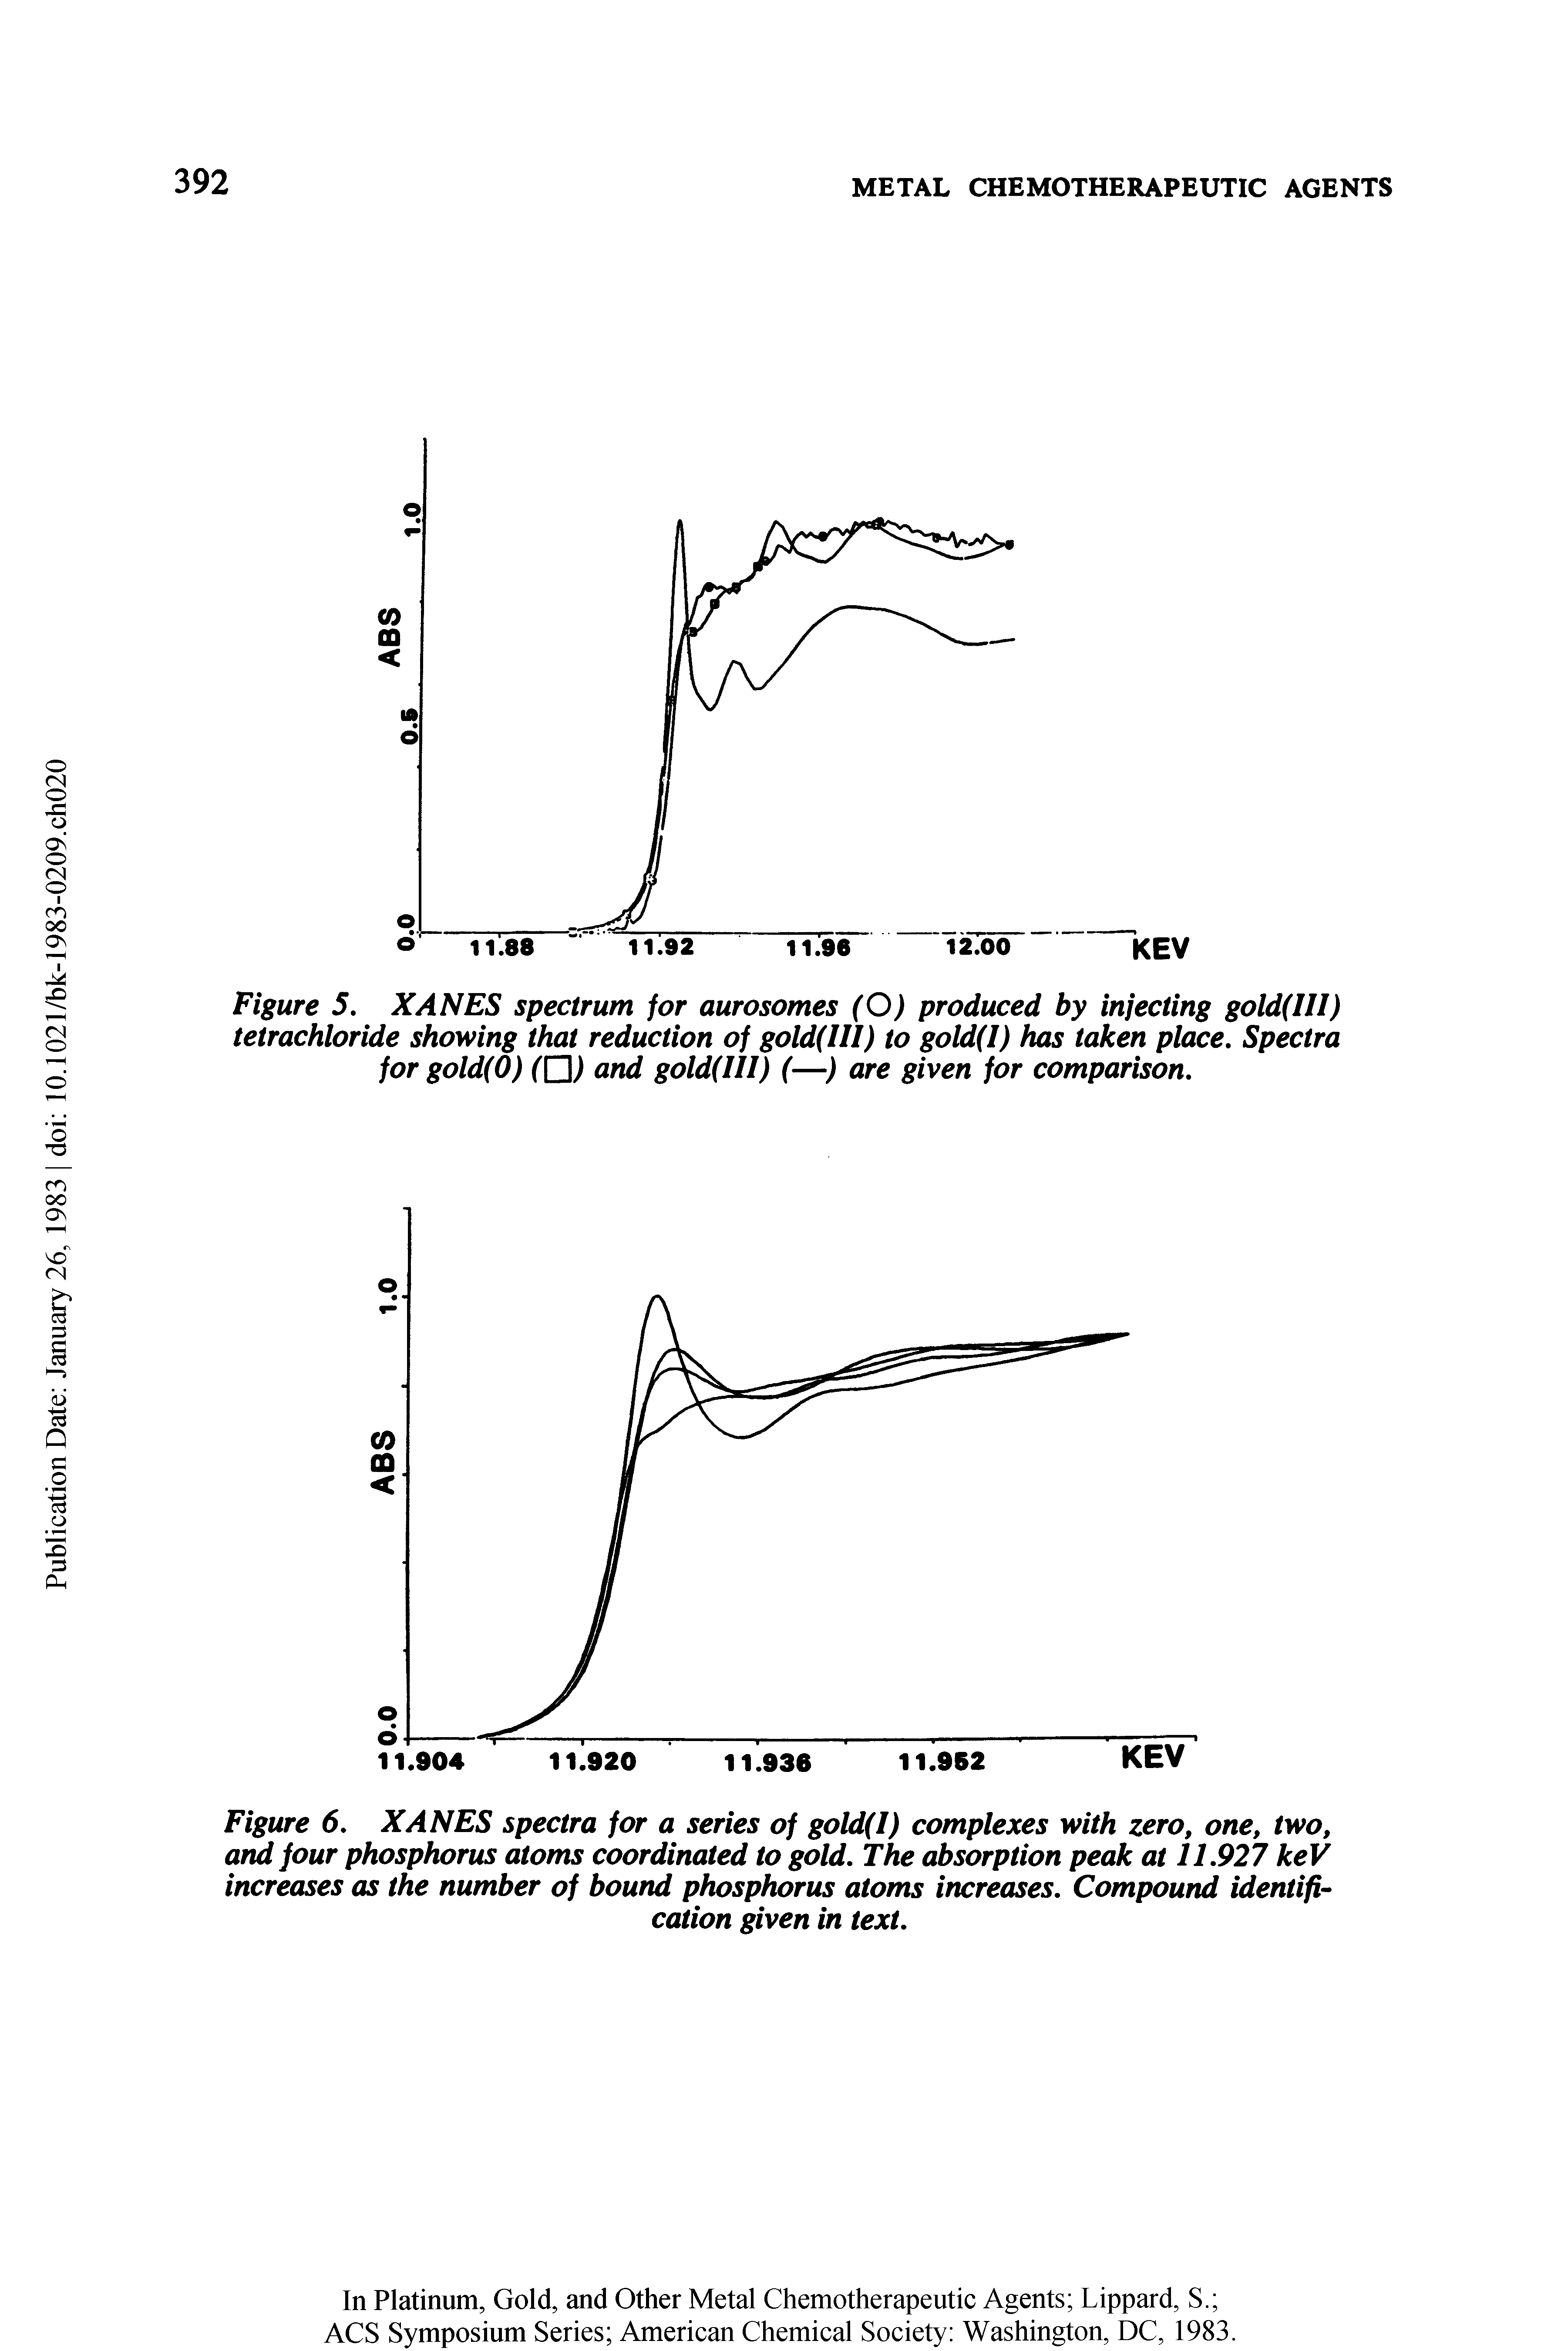 Figure 6. XANES spectra for a series of gold(I) complexes with zero, one, two, and jour phosphorus atoms coordinated to gold. The absorption peak at 11.927 keV increases as the number of bouttd phosphorus atoms increases. Compound identification given in text.